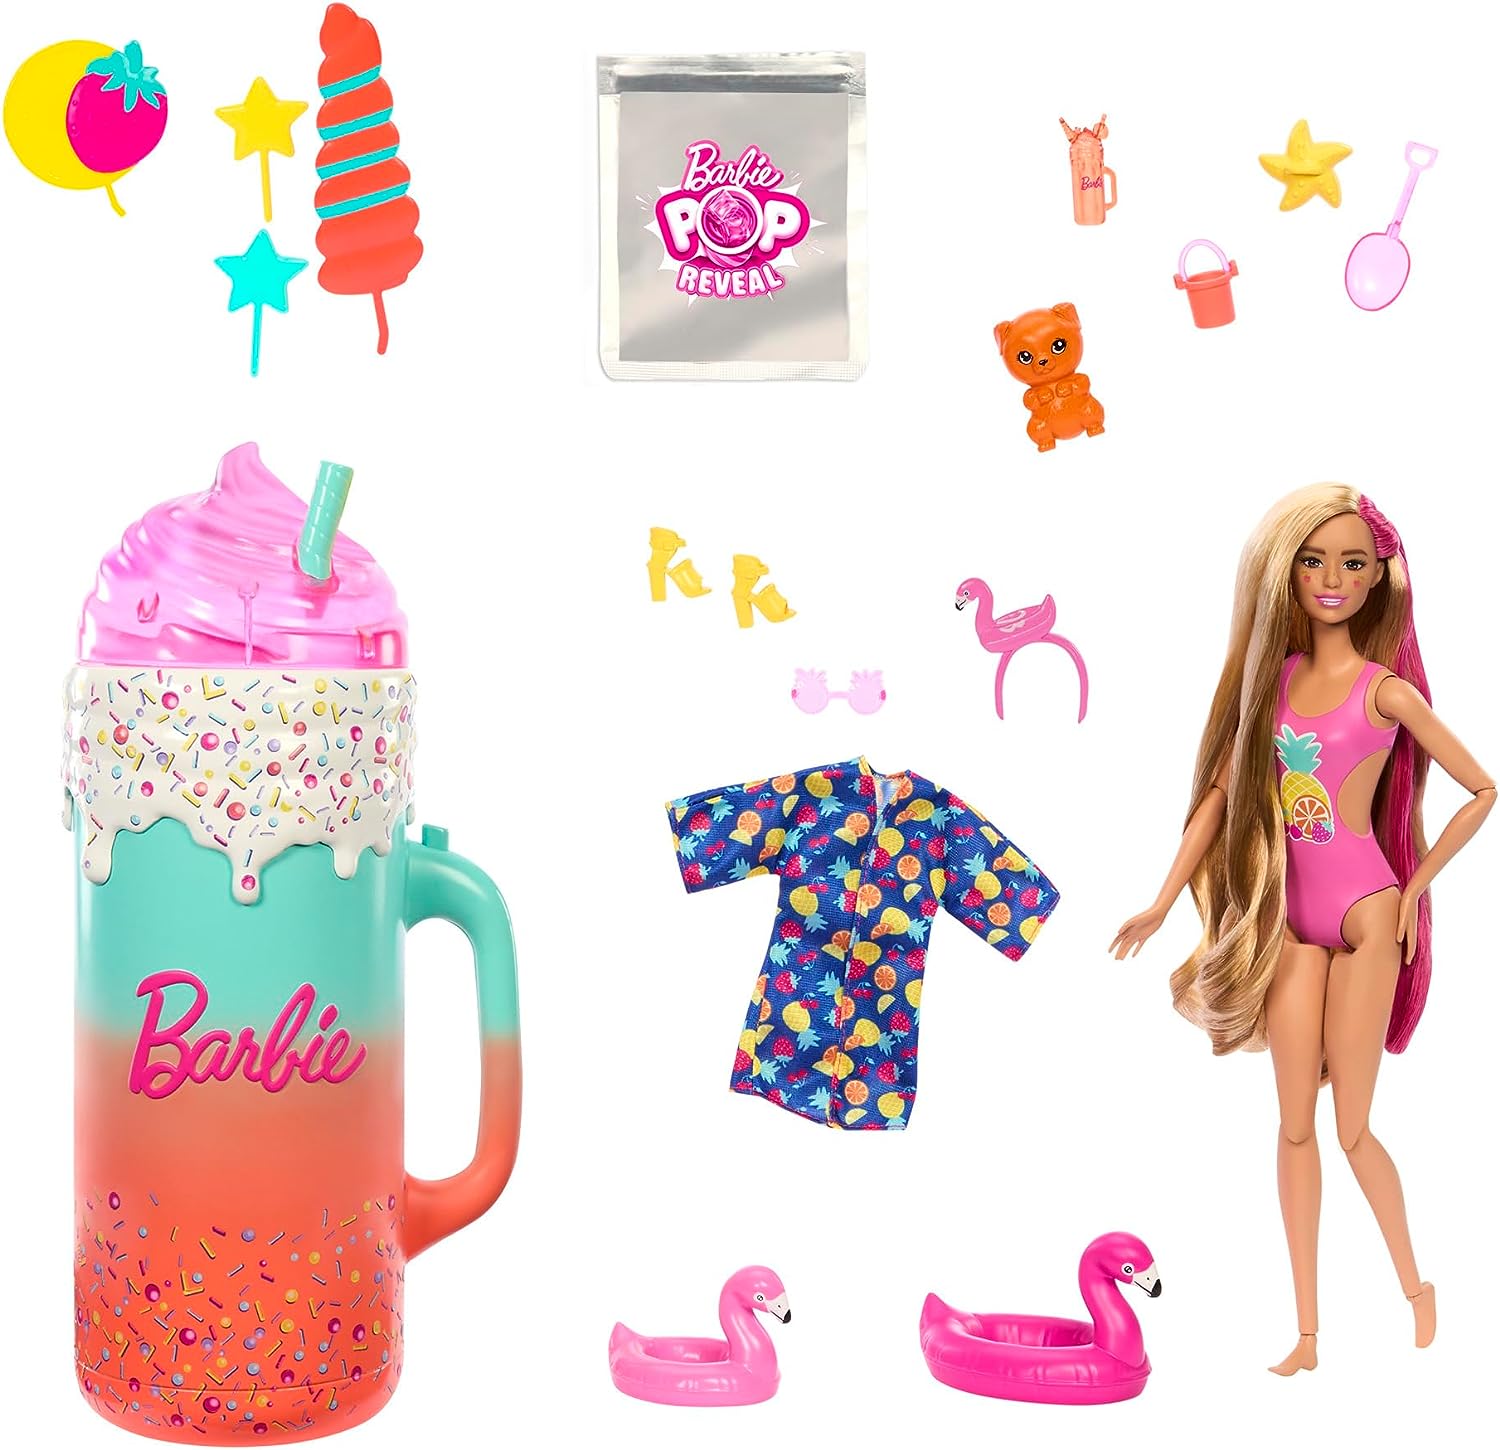 Barbie Pop Reveal Doll & Accessories, Rise & Surprise Fruit Series Gift Set  with